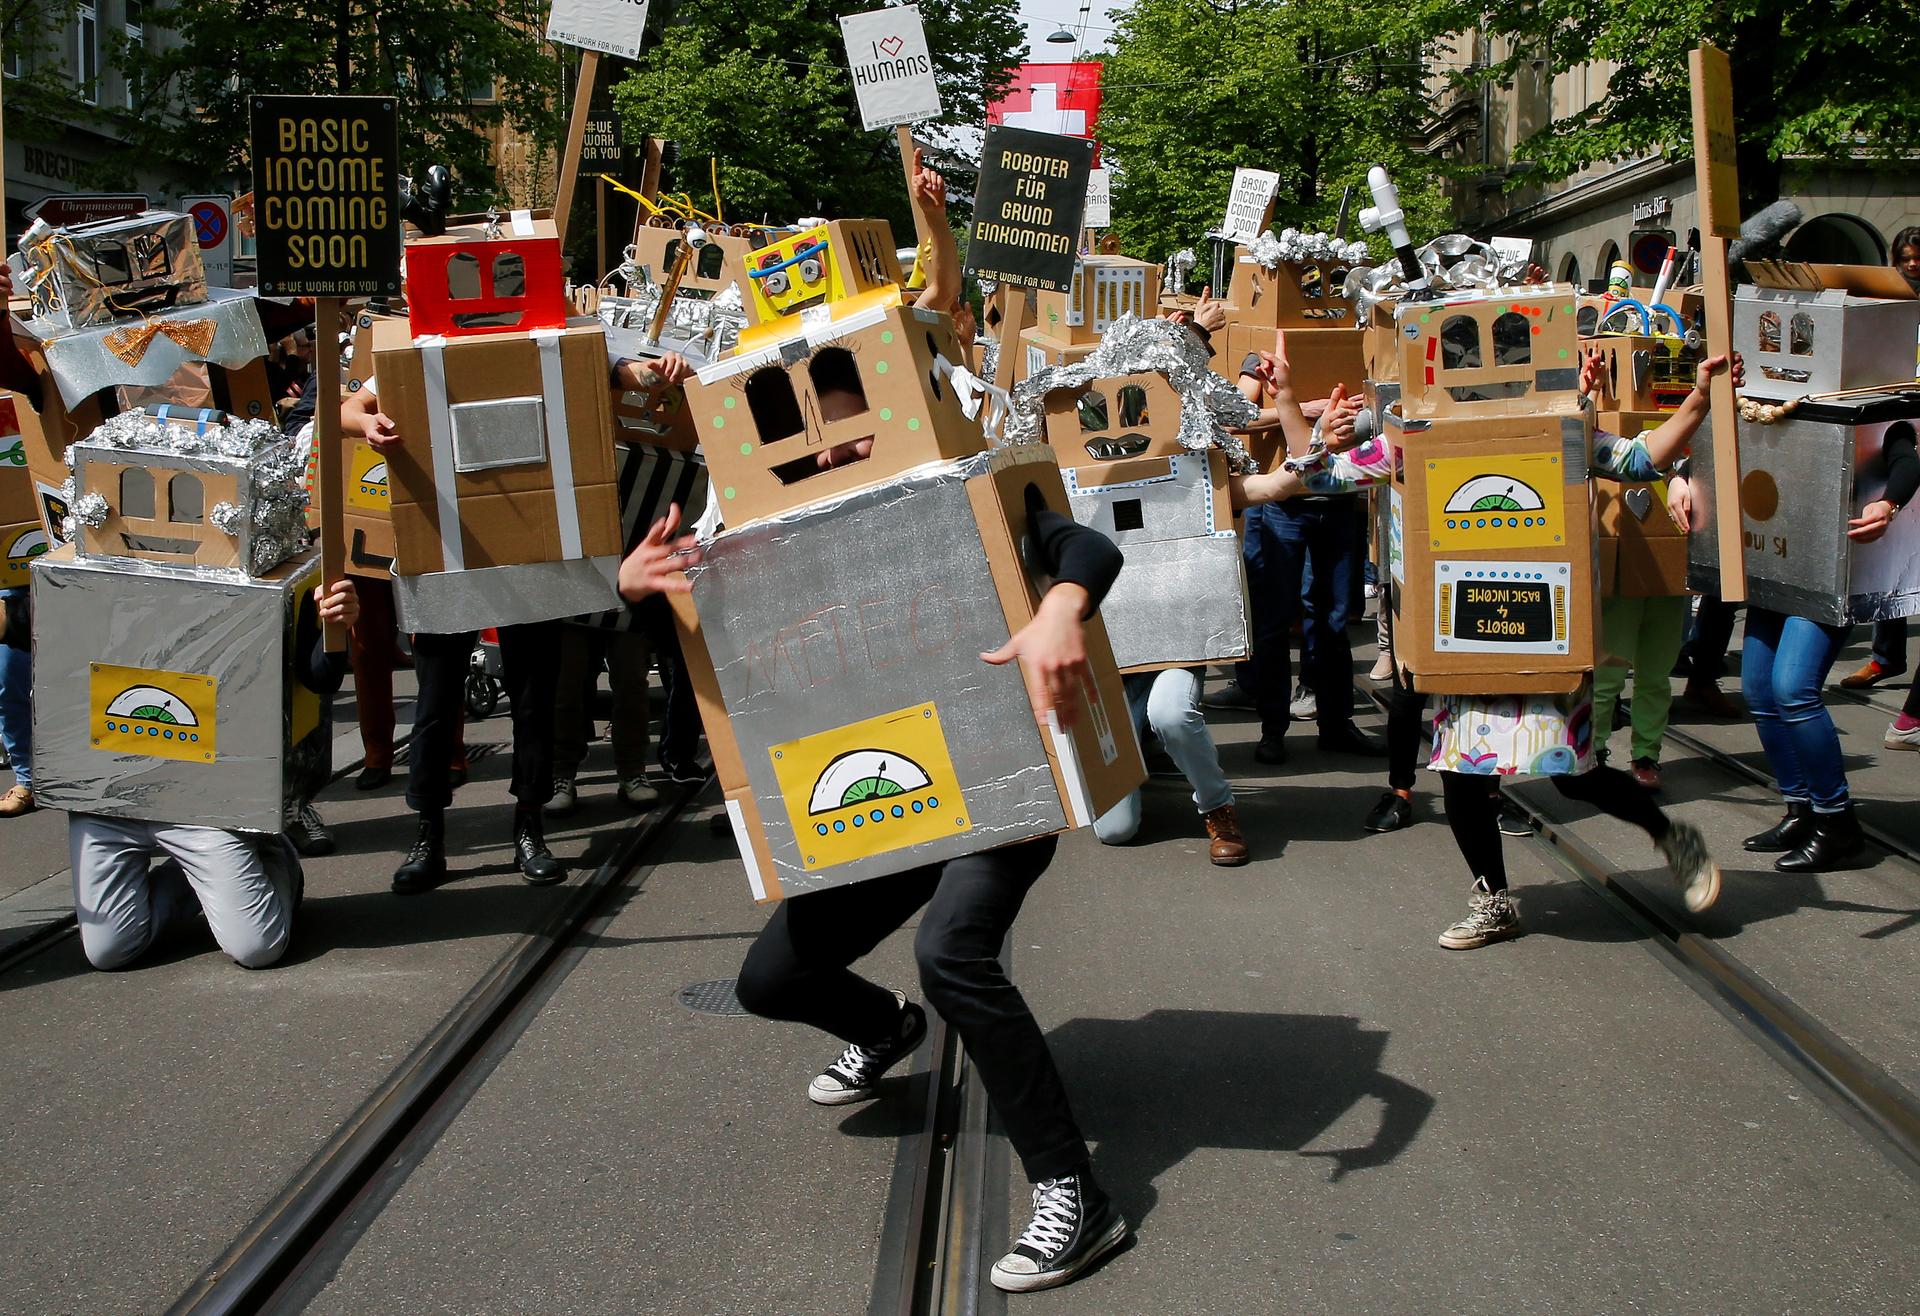 Protesters dressed as robots demand a basic income 